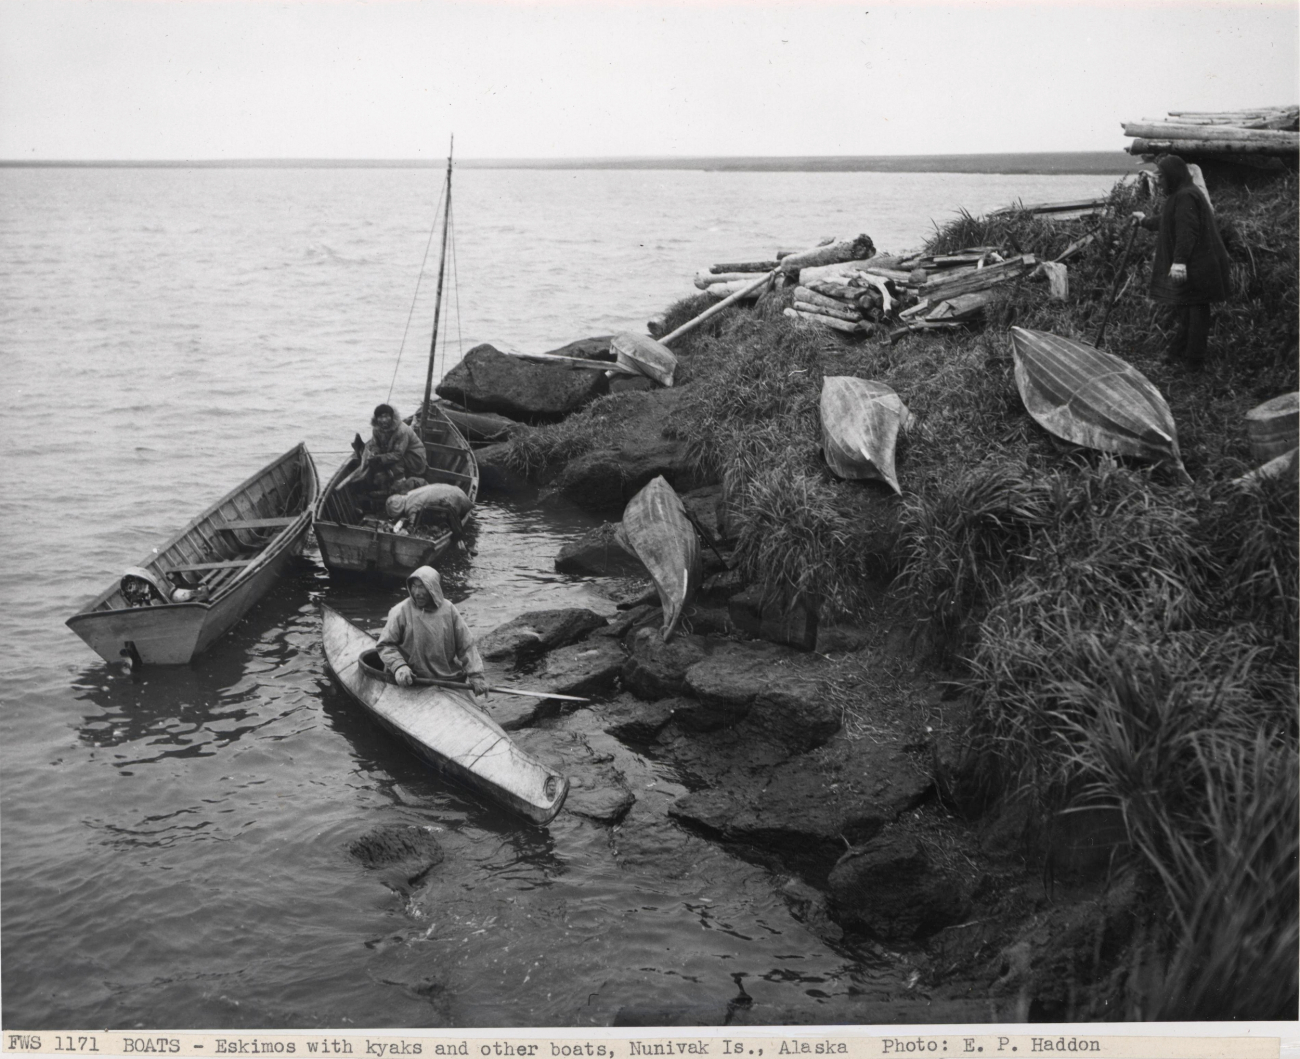 Eskimos with kayaks and other boats